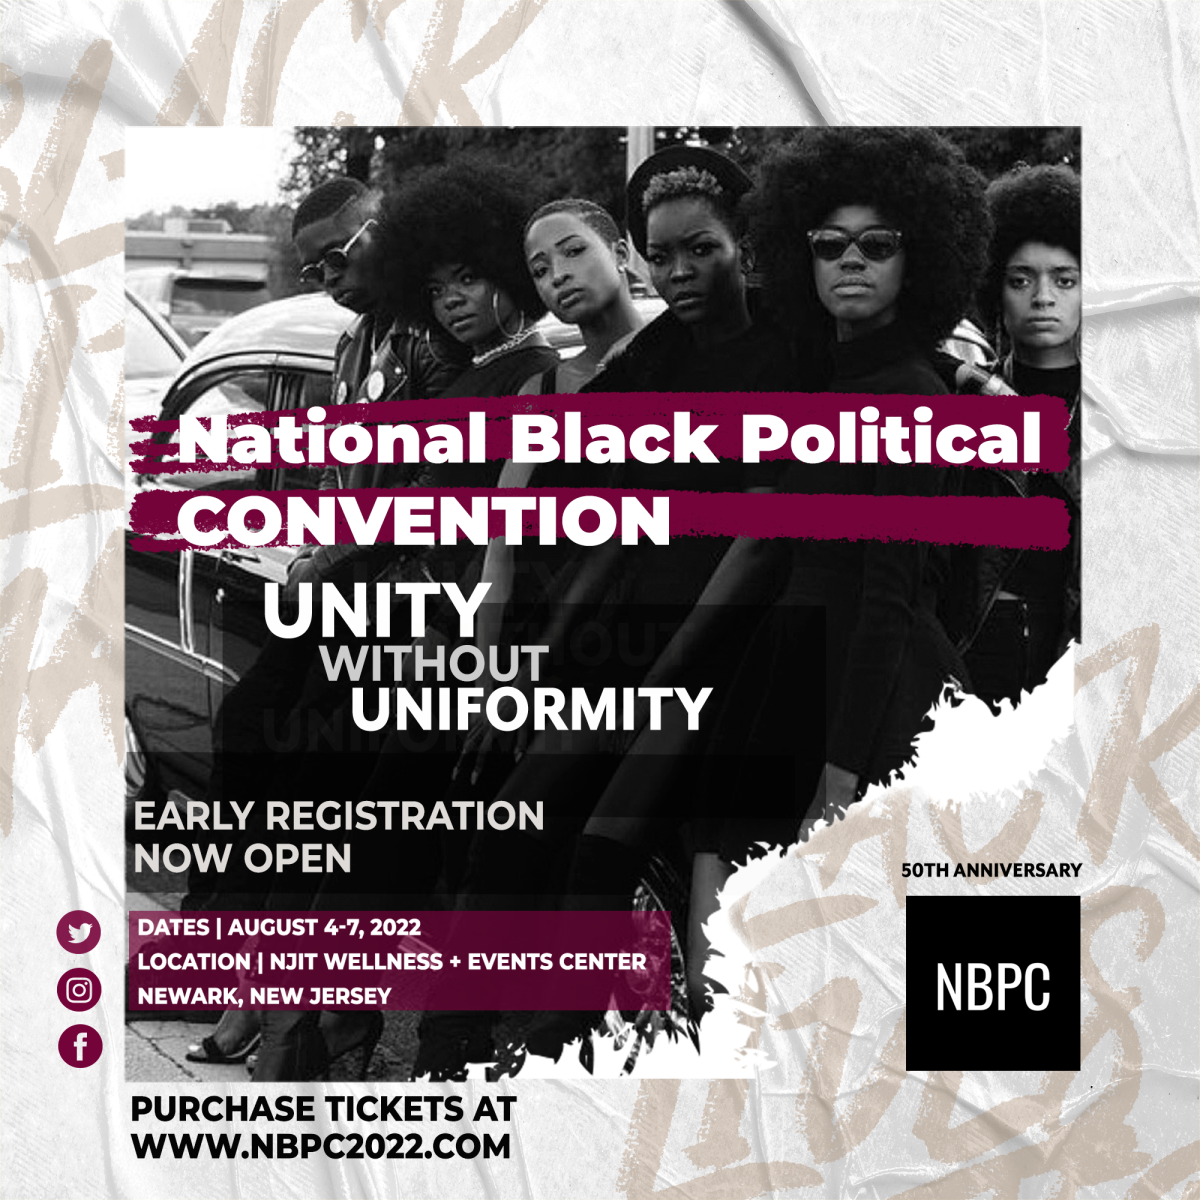 National Black Political Convention Registration is Open